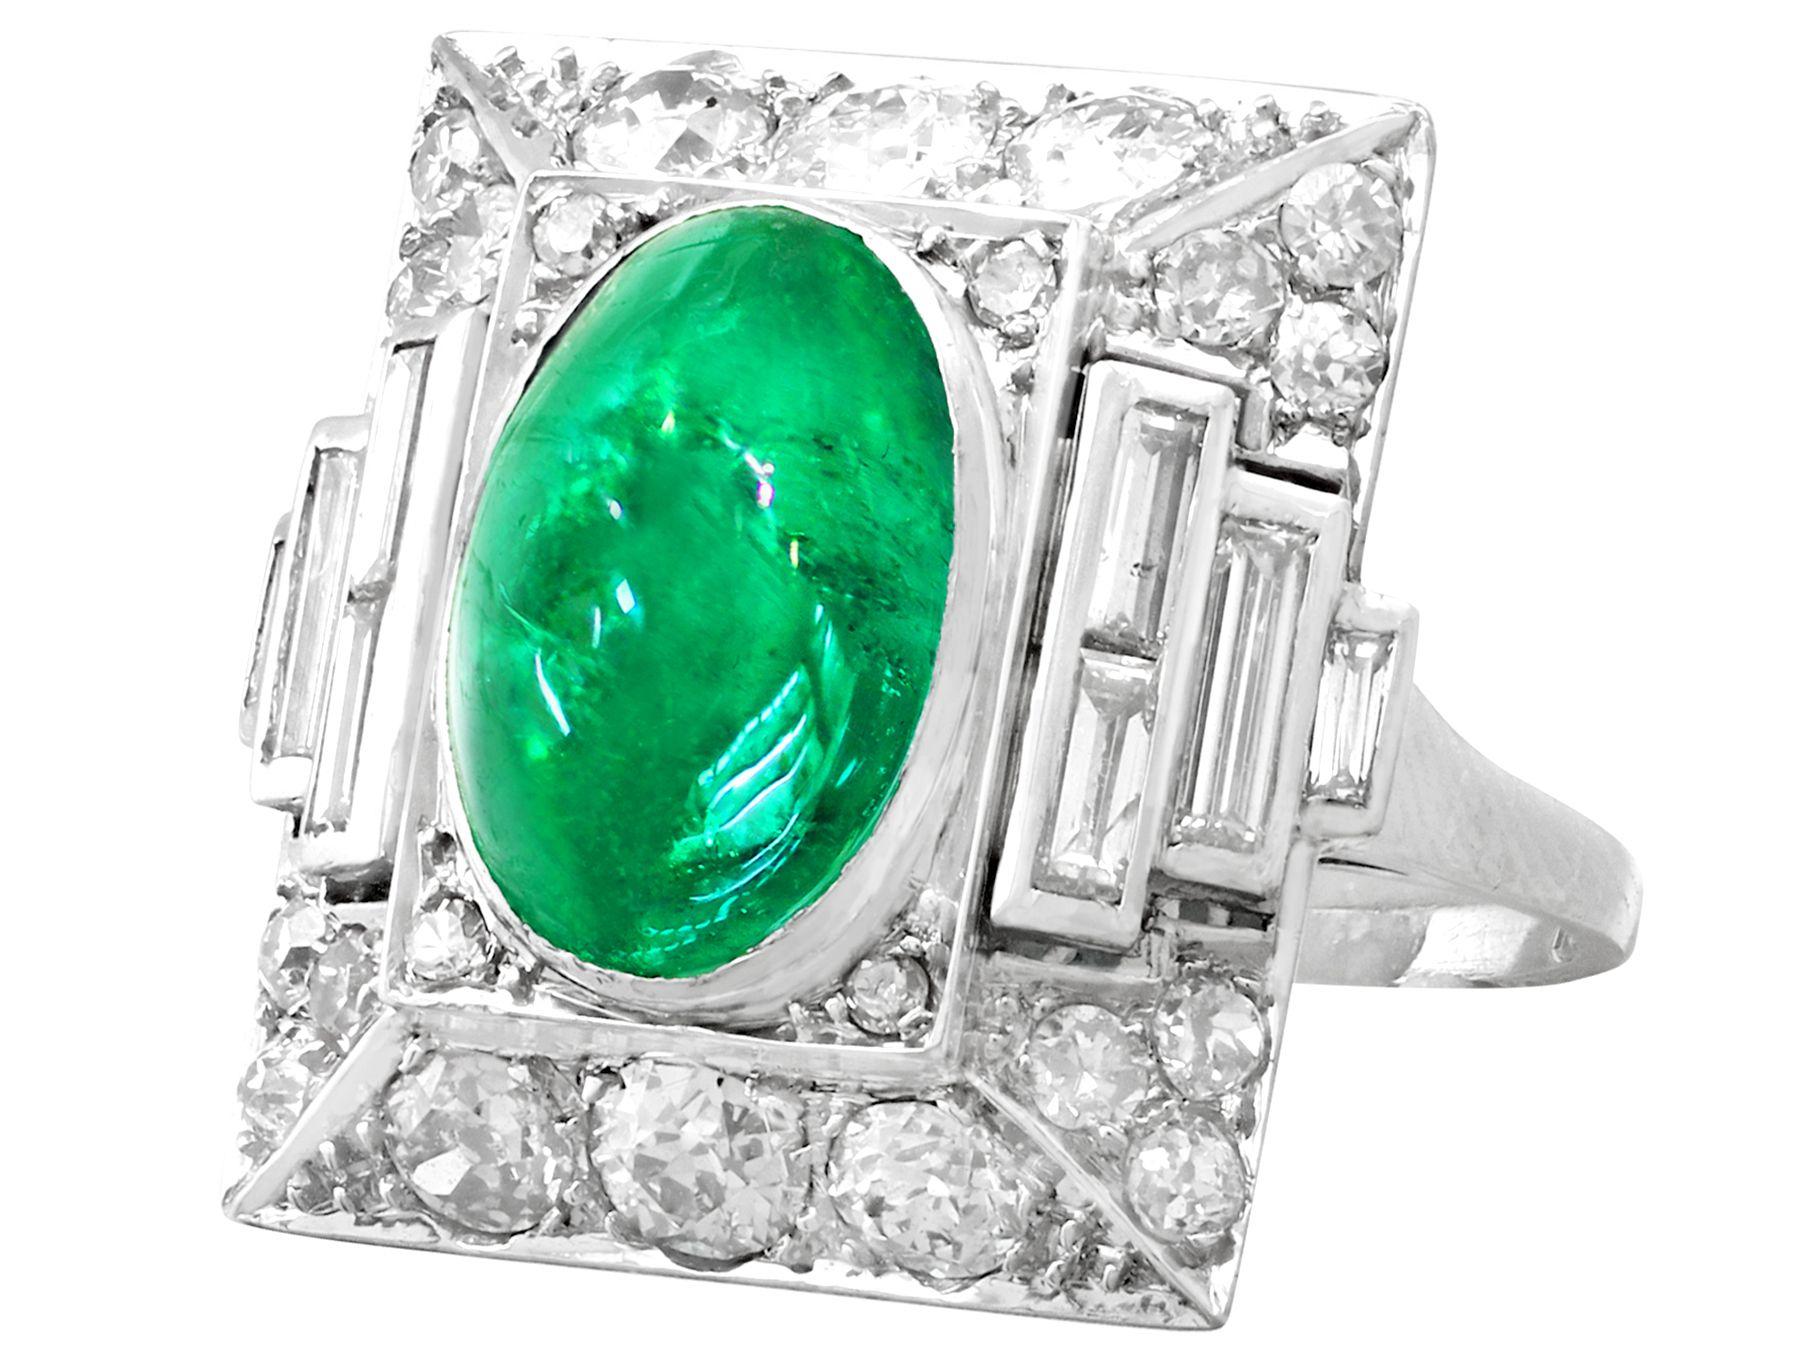 1935 Antique 3.40ct Cabochon Cut Emerald and 2.72ct Diamond Cocktail Ring In Excellent Condition For Sale In Jesmond, Newcastle Upon Tyne